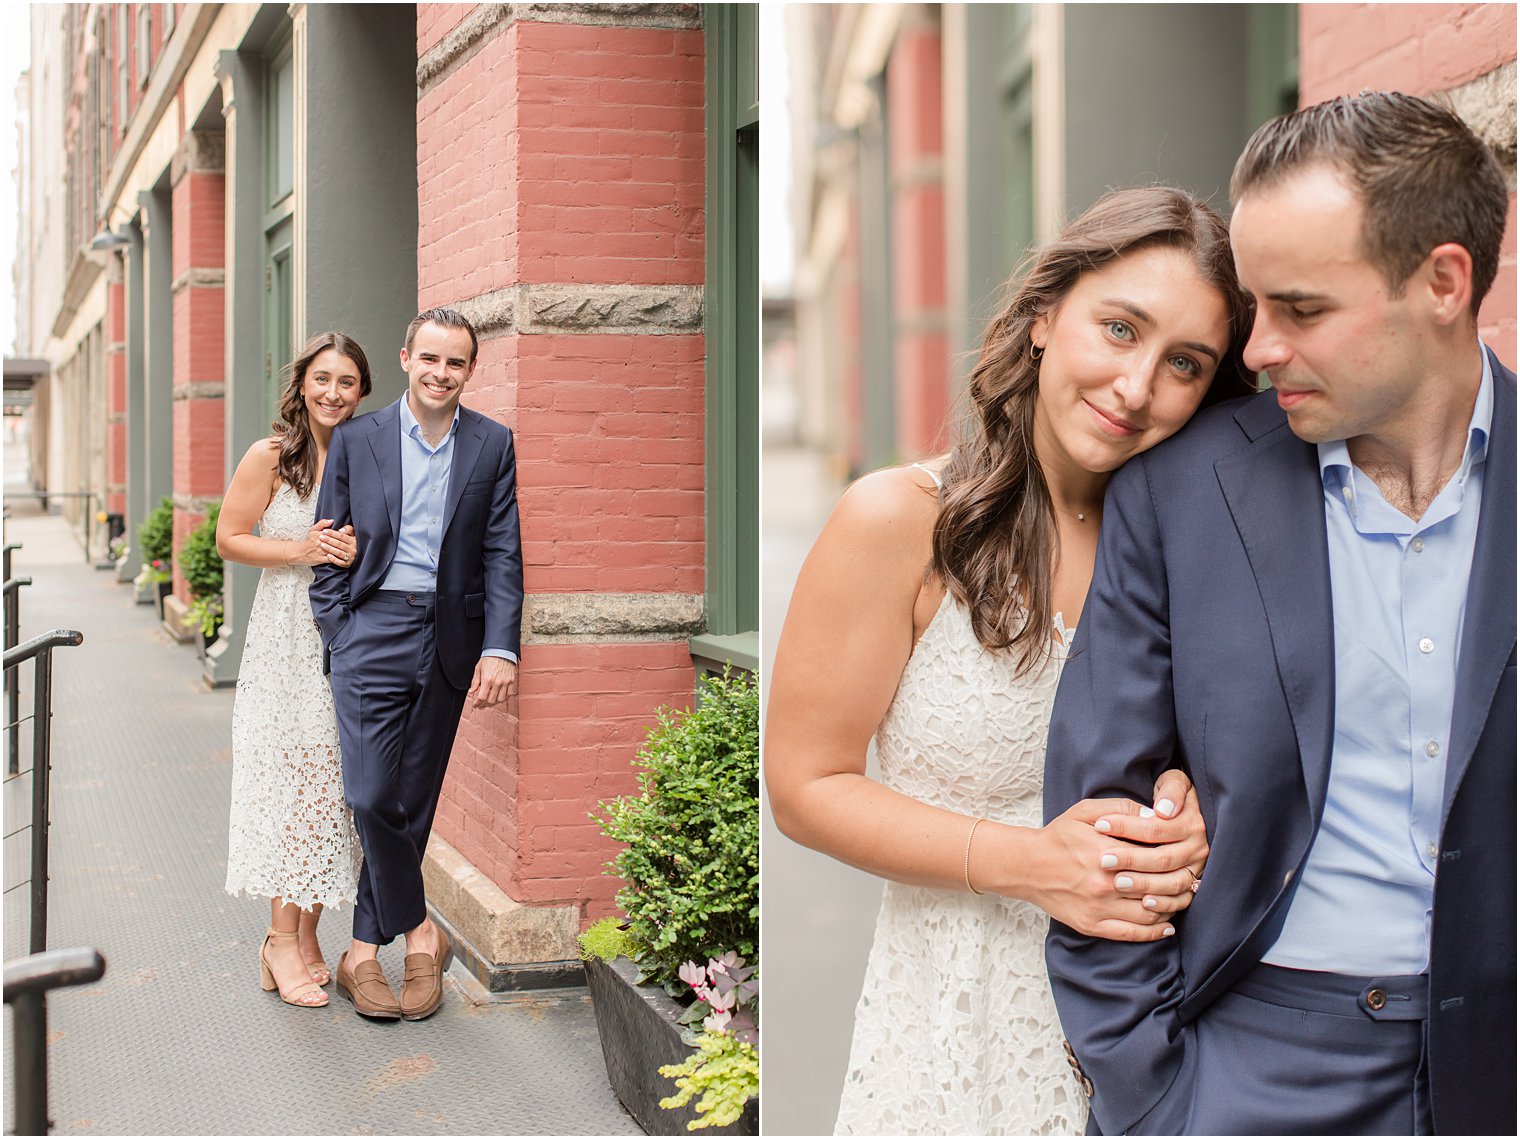 relaxed pose ideas for engagement session